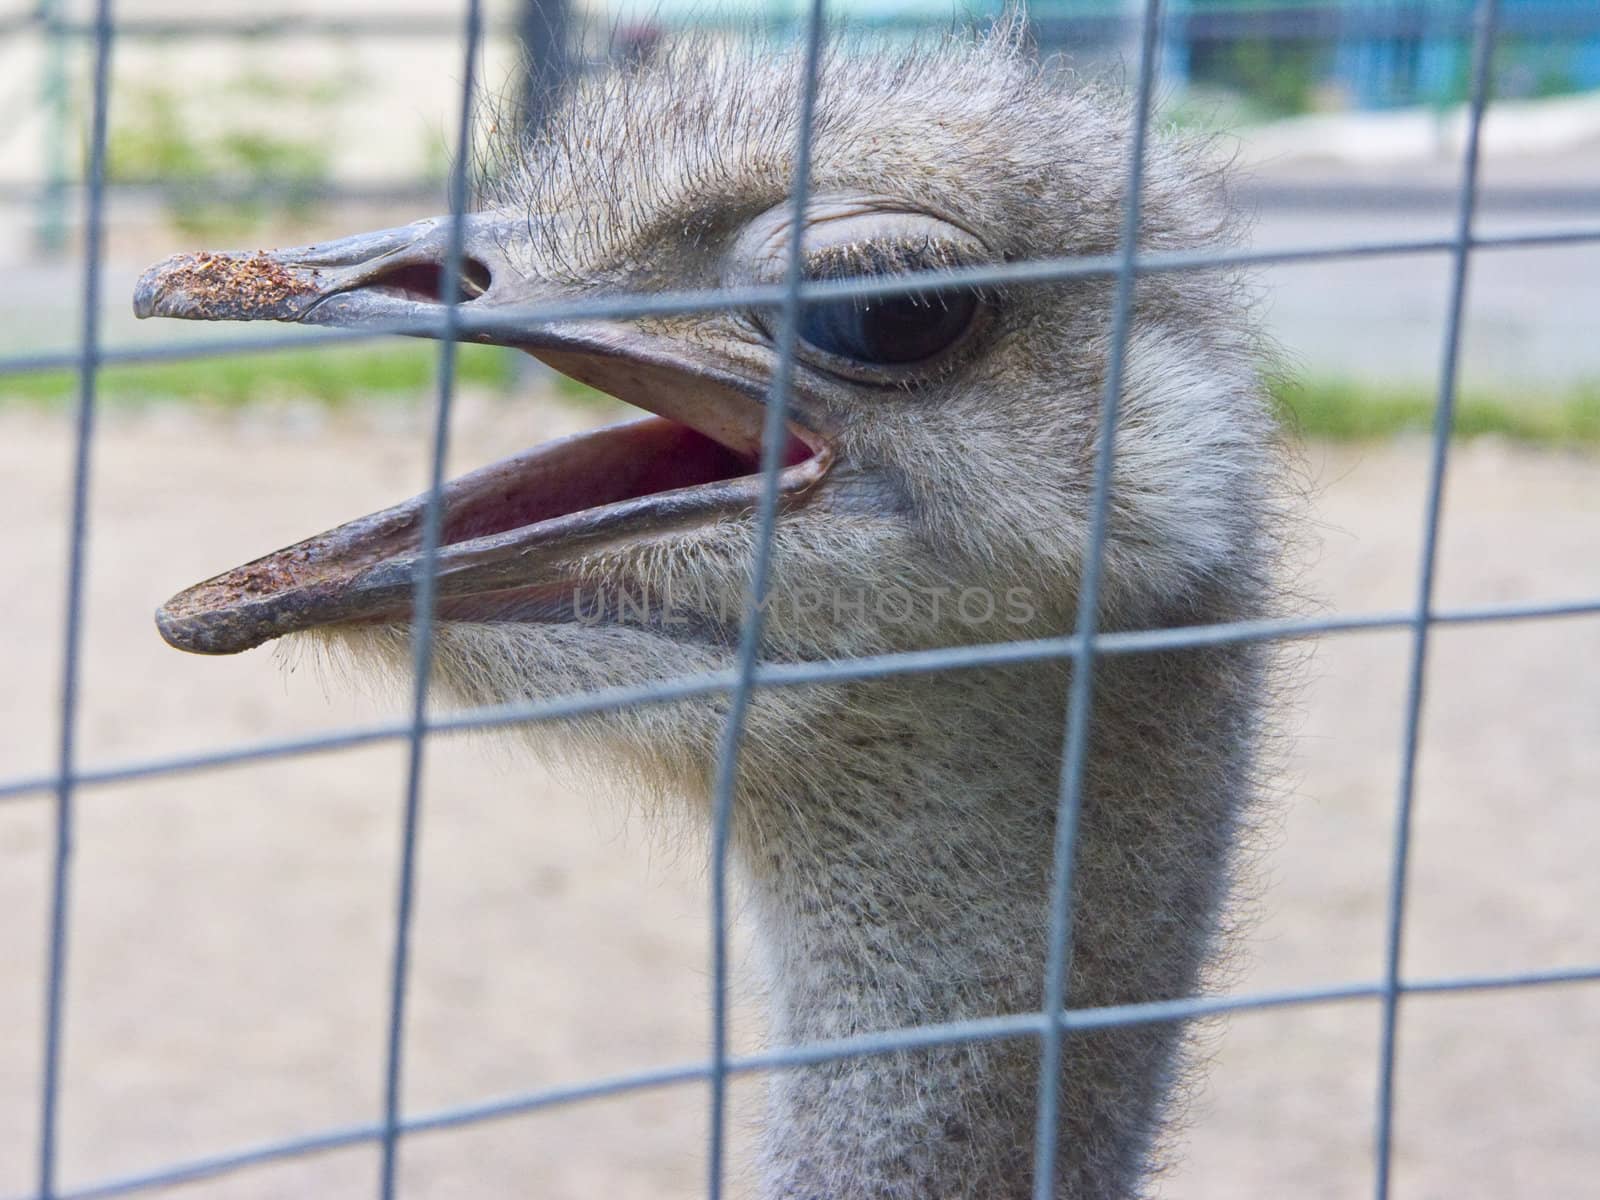 The image of a head of an ostrich with the open beak